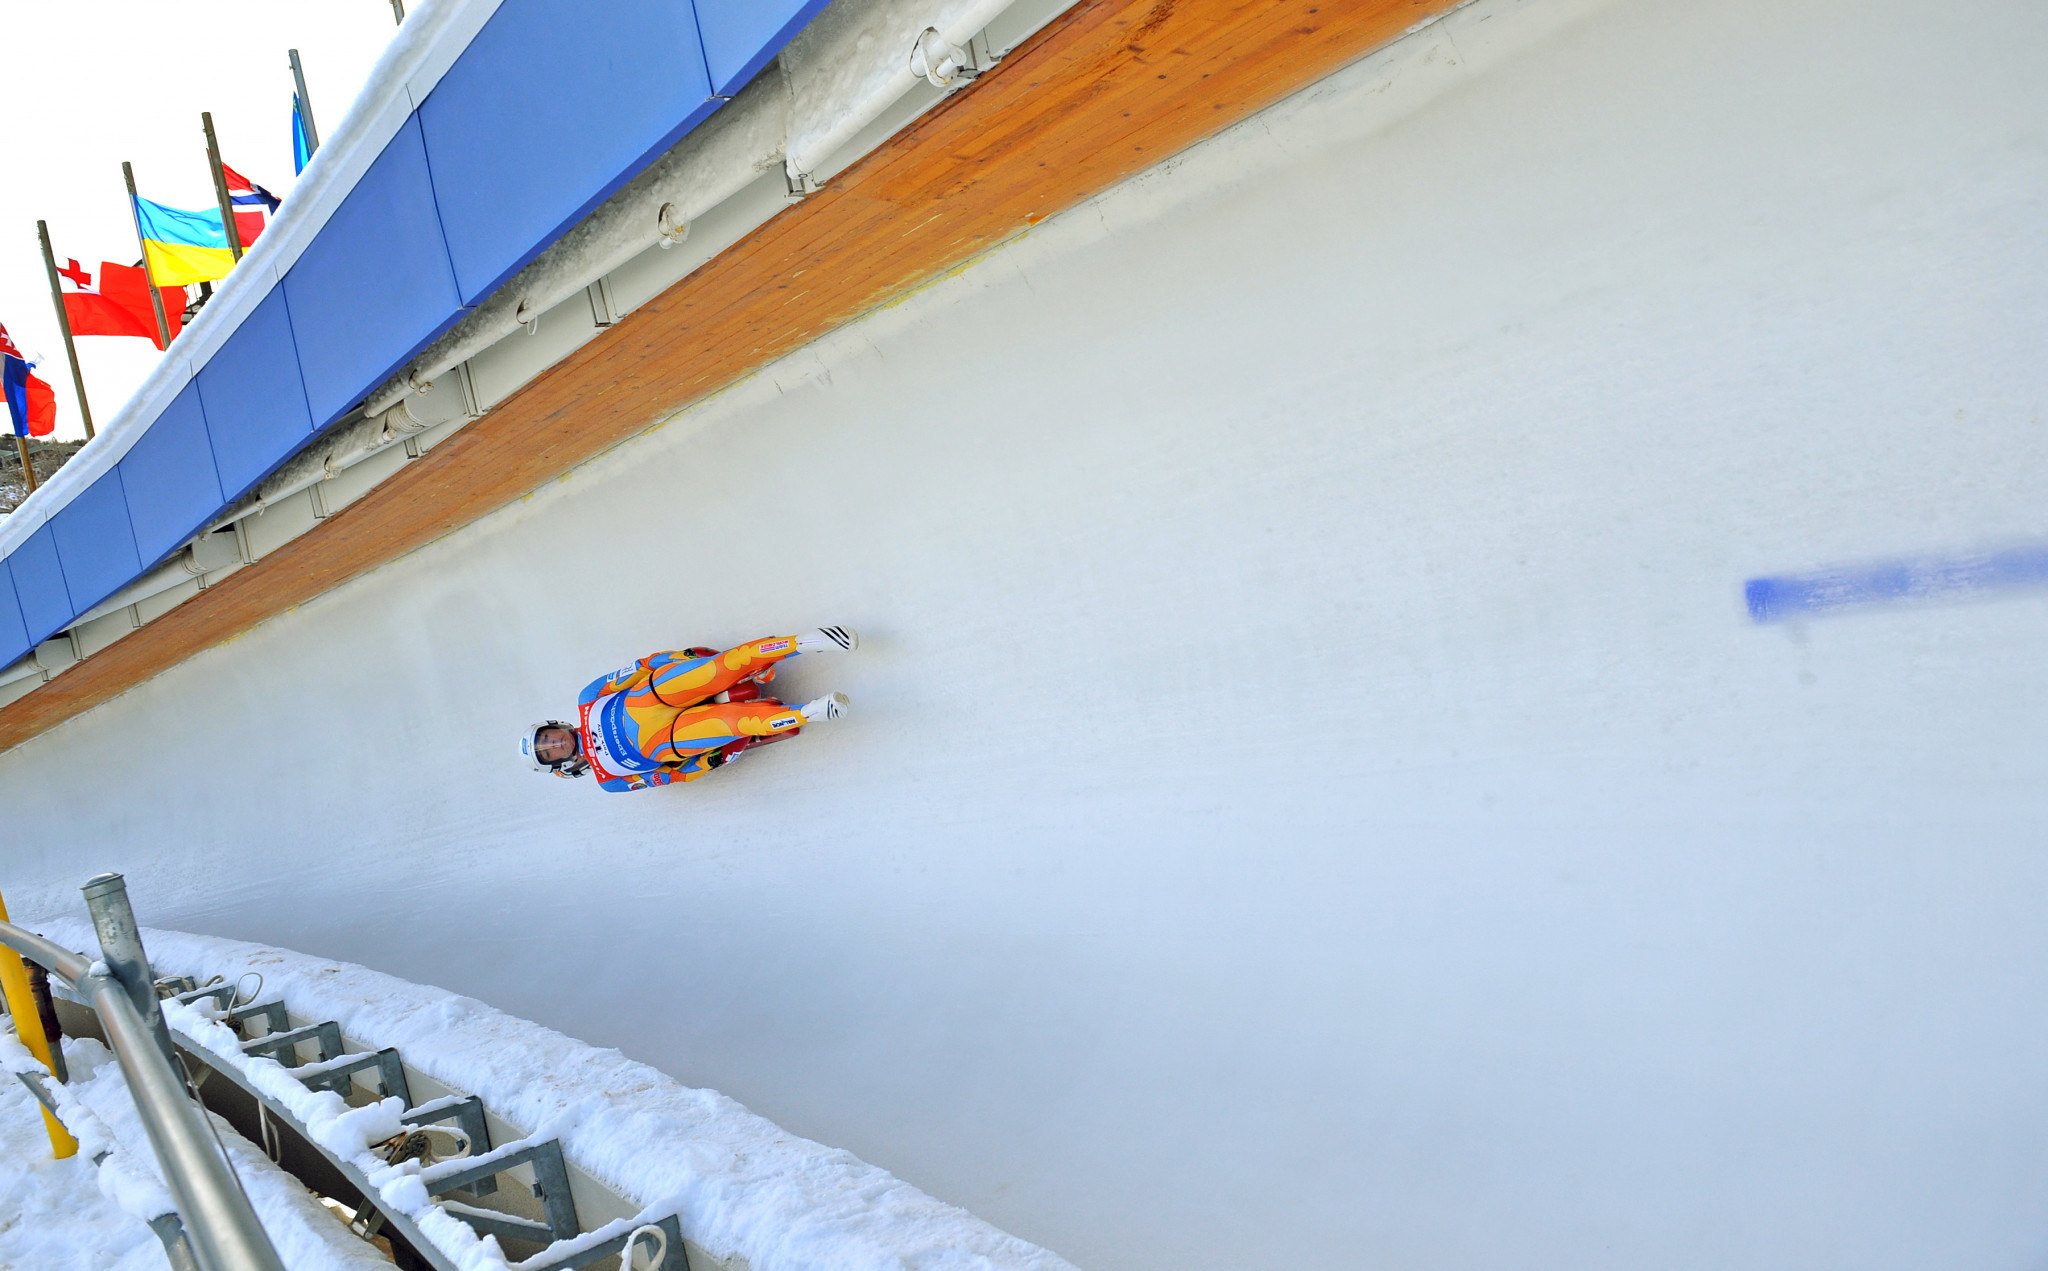 Luge World Cup leader Ludwig looks to get back on track in Sigulda